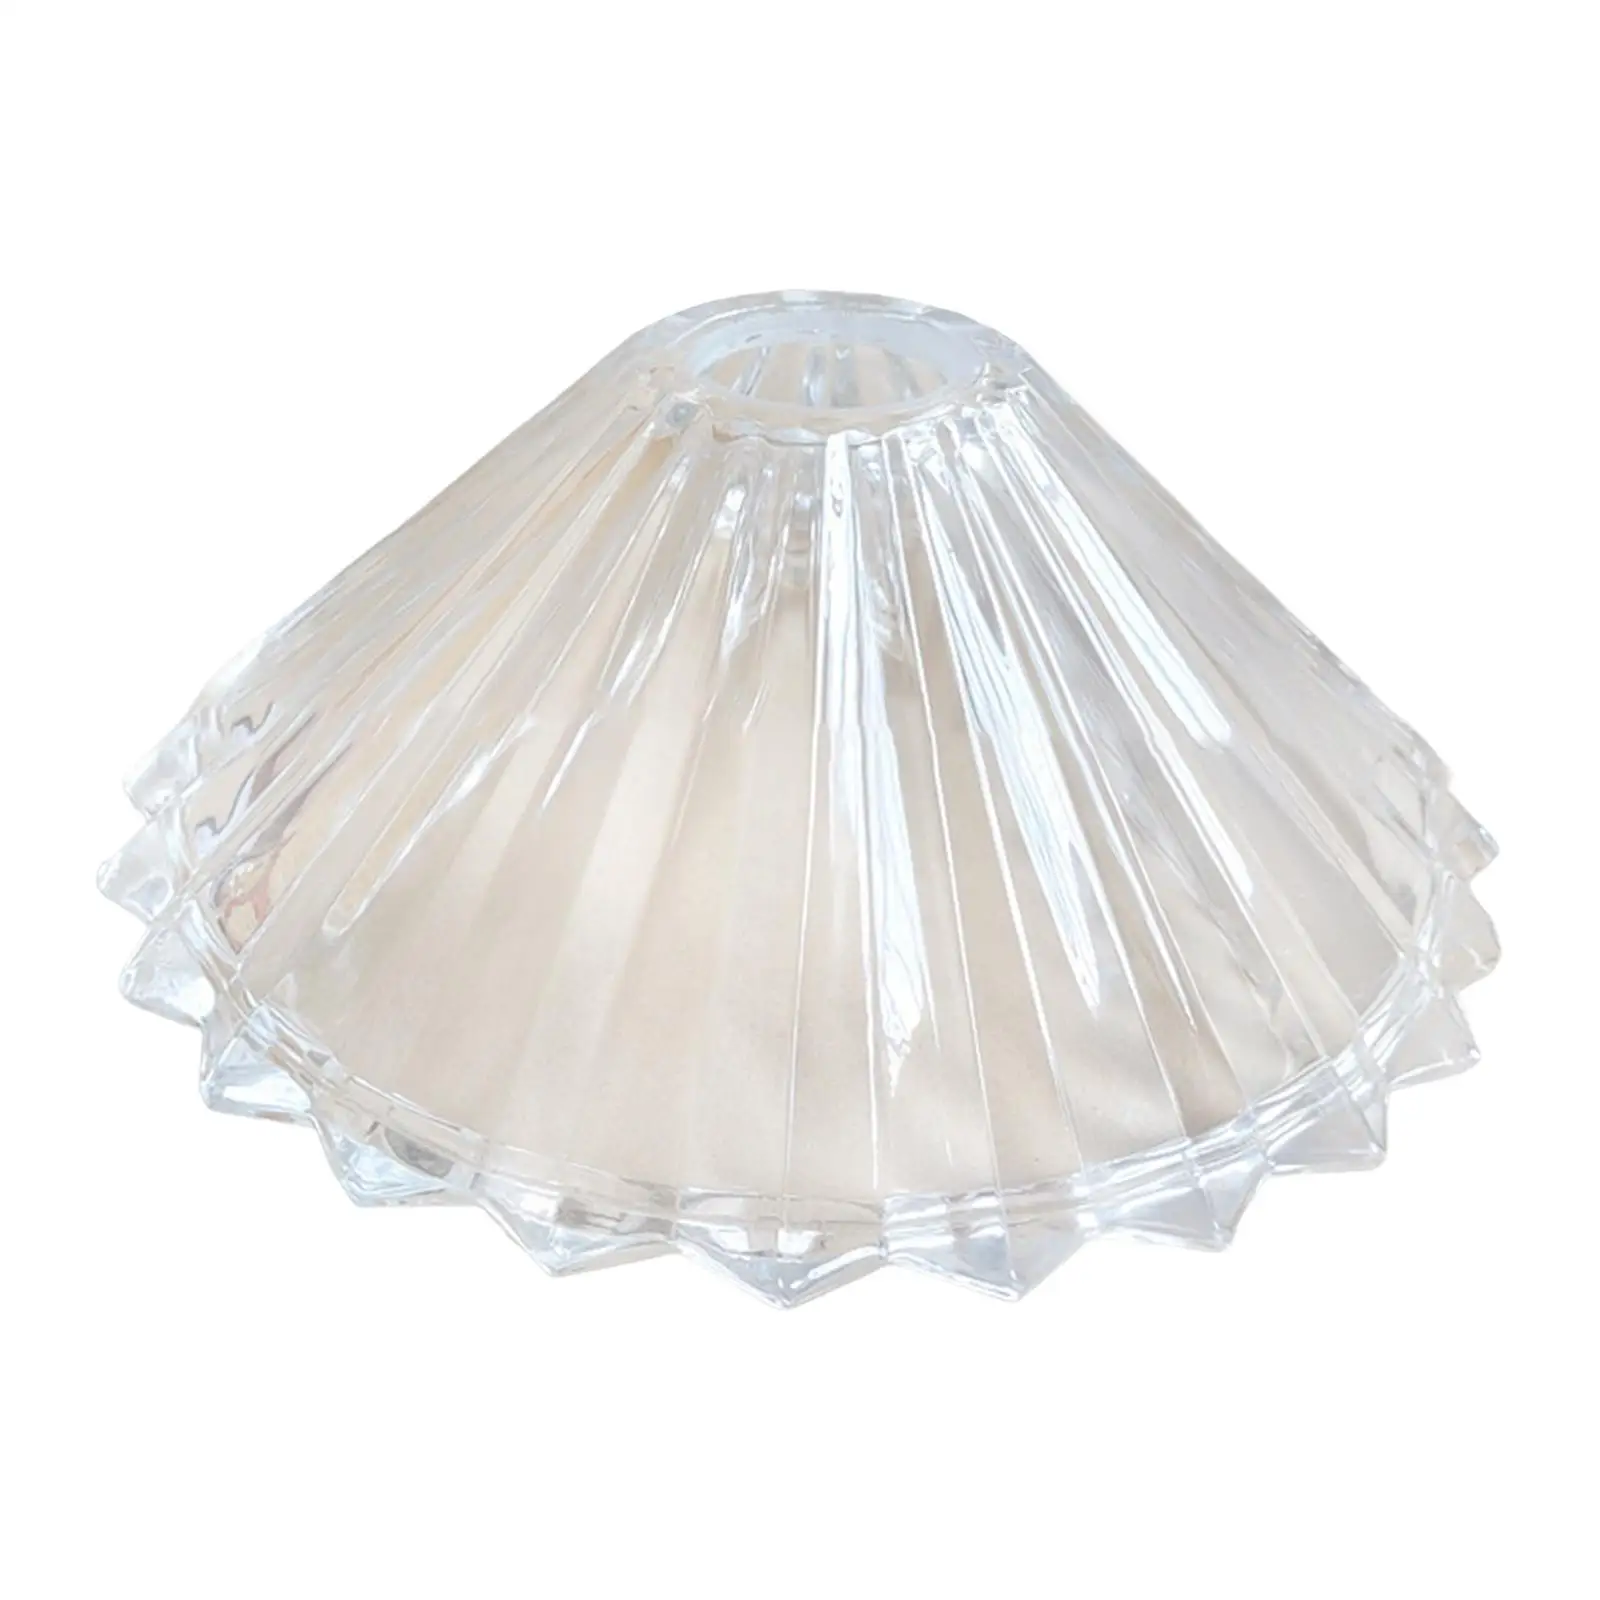 European Style Glass Lampshade Embossed Design Clear Sturdy Glass Lights Covers